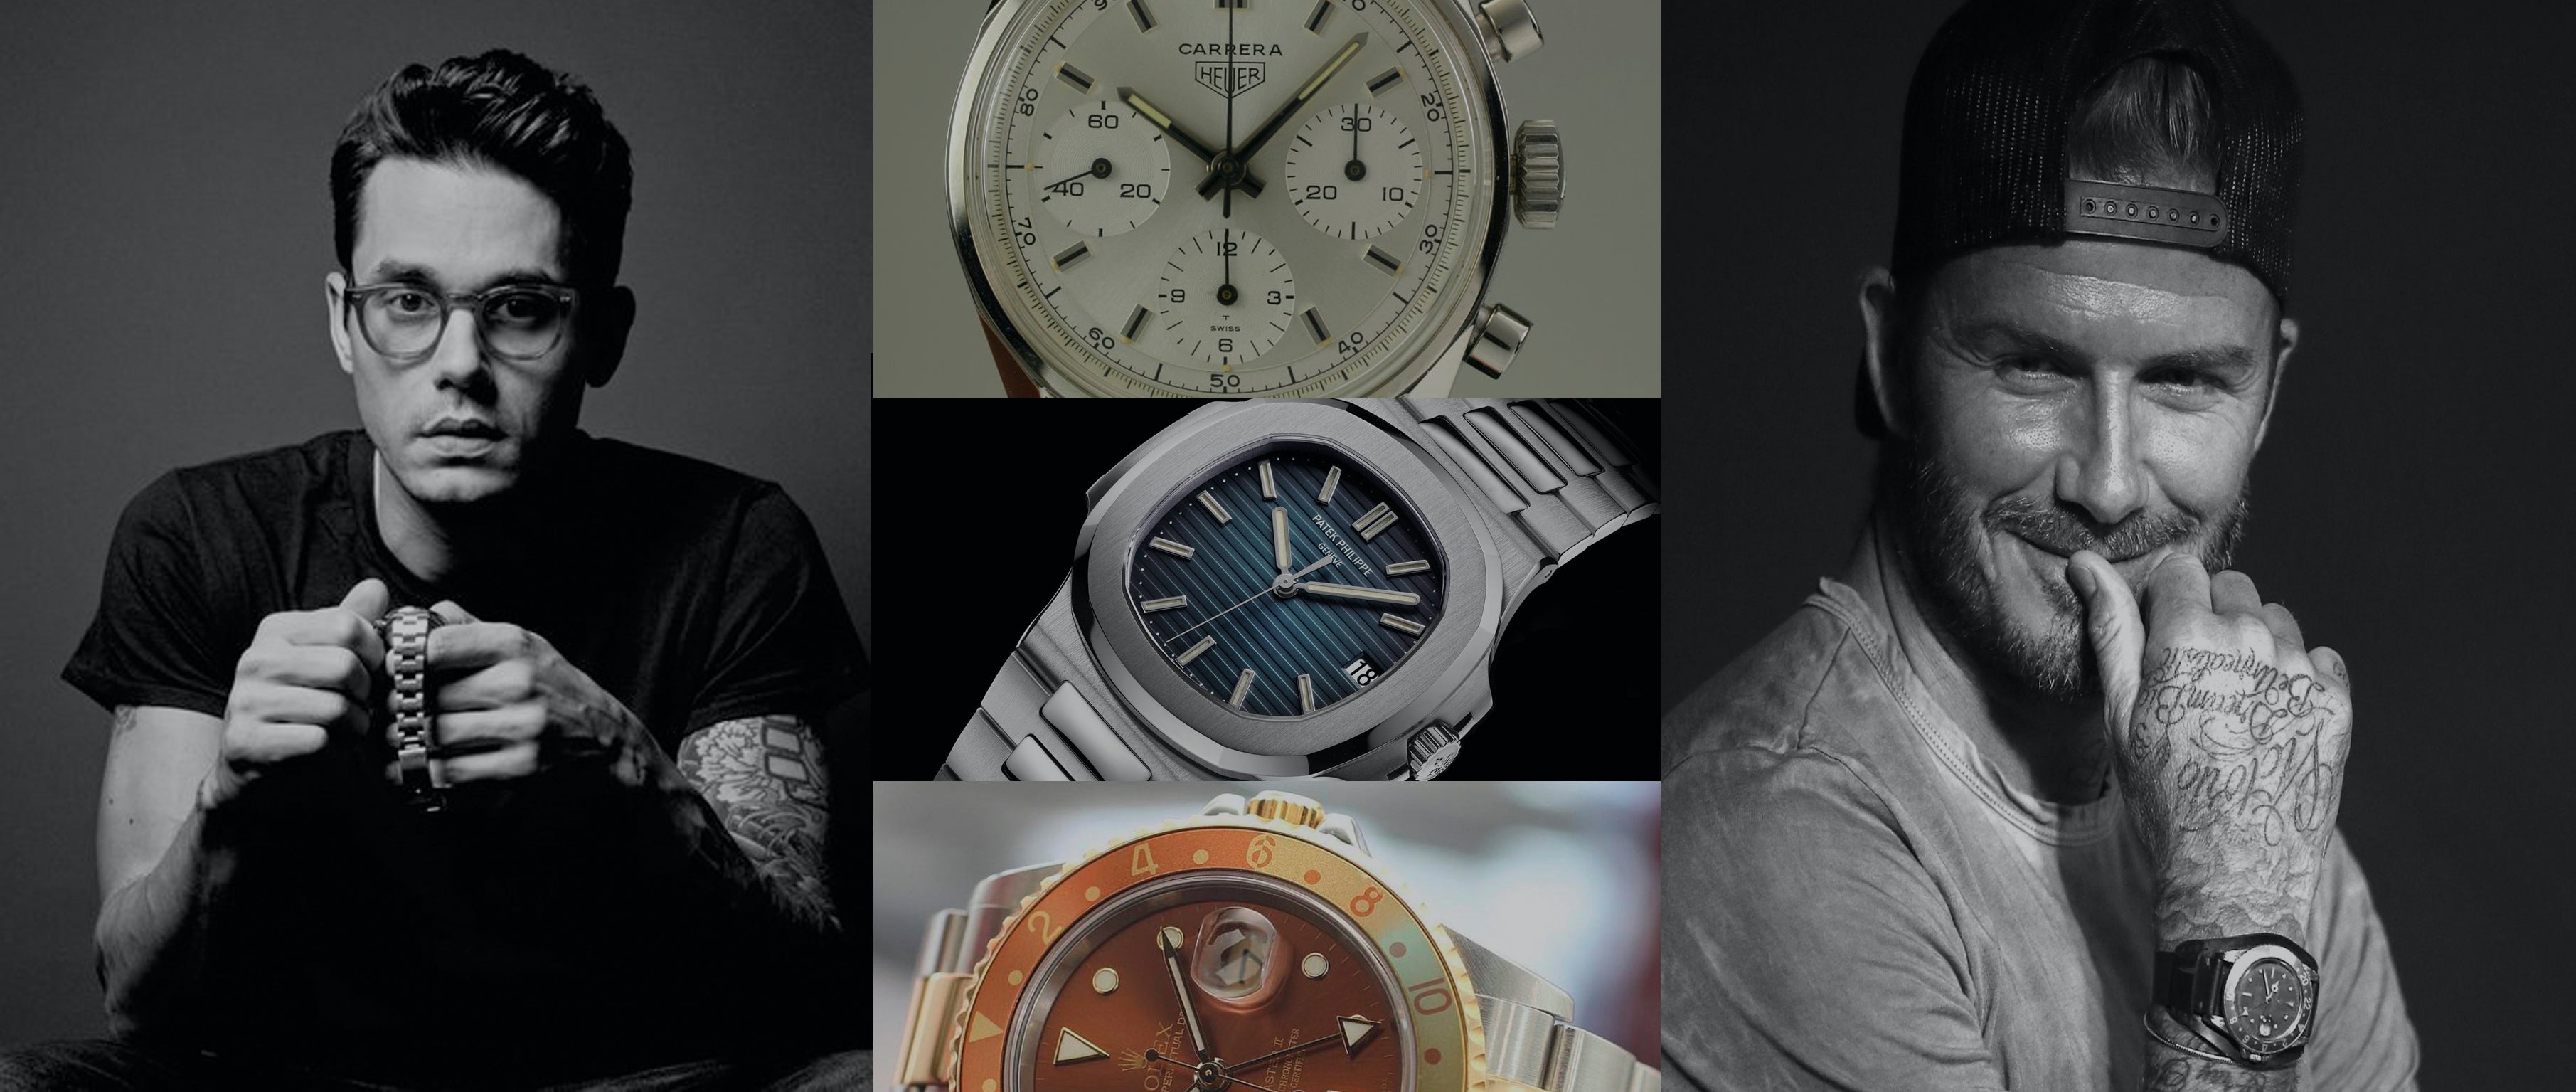 Celebrity Vintage Watch Collections - Who Has The Best Taste?